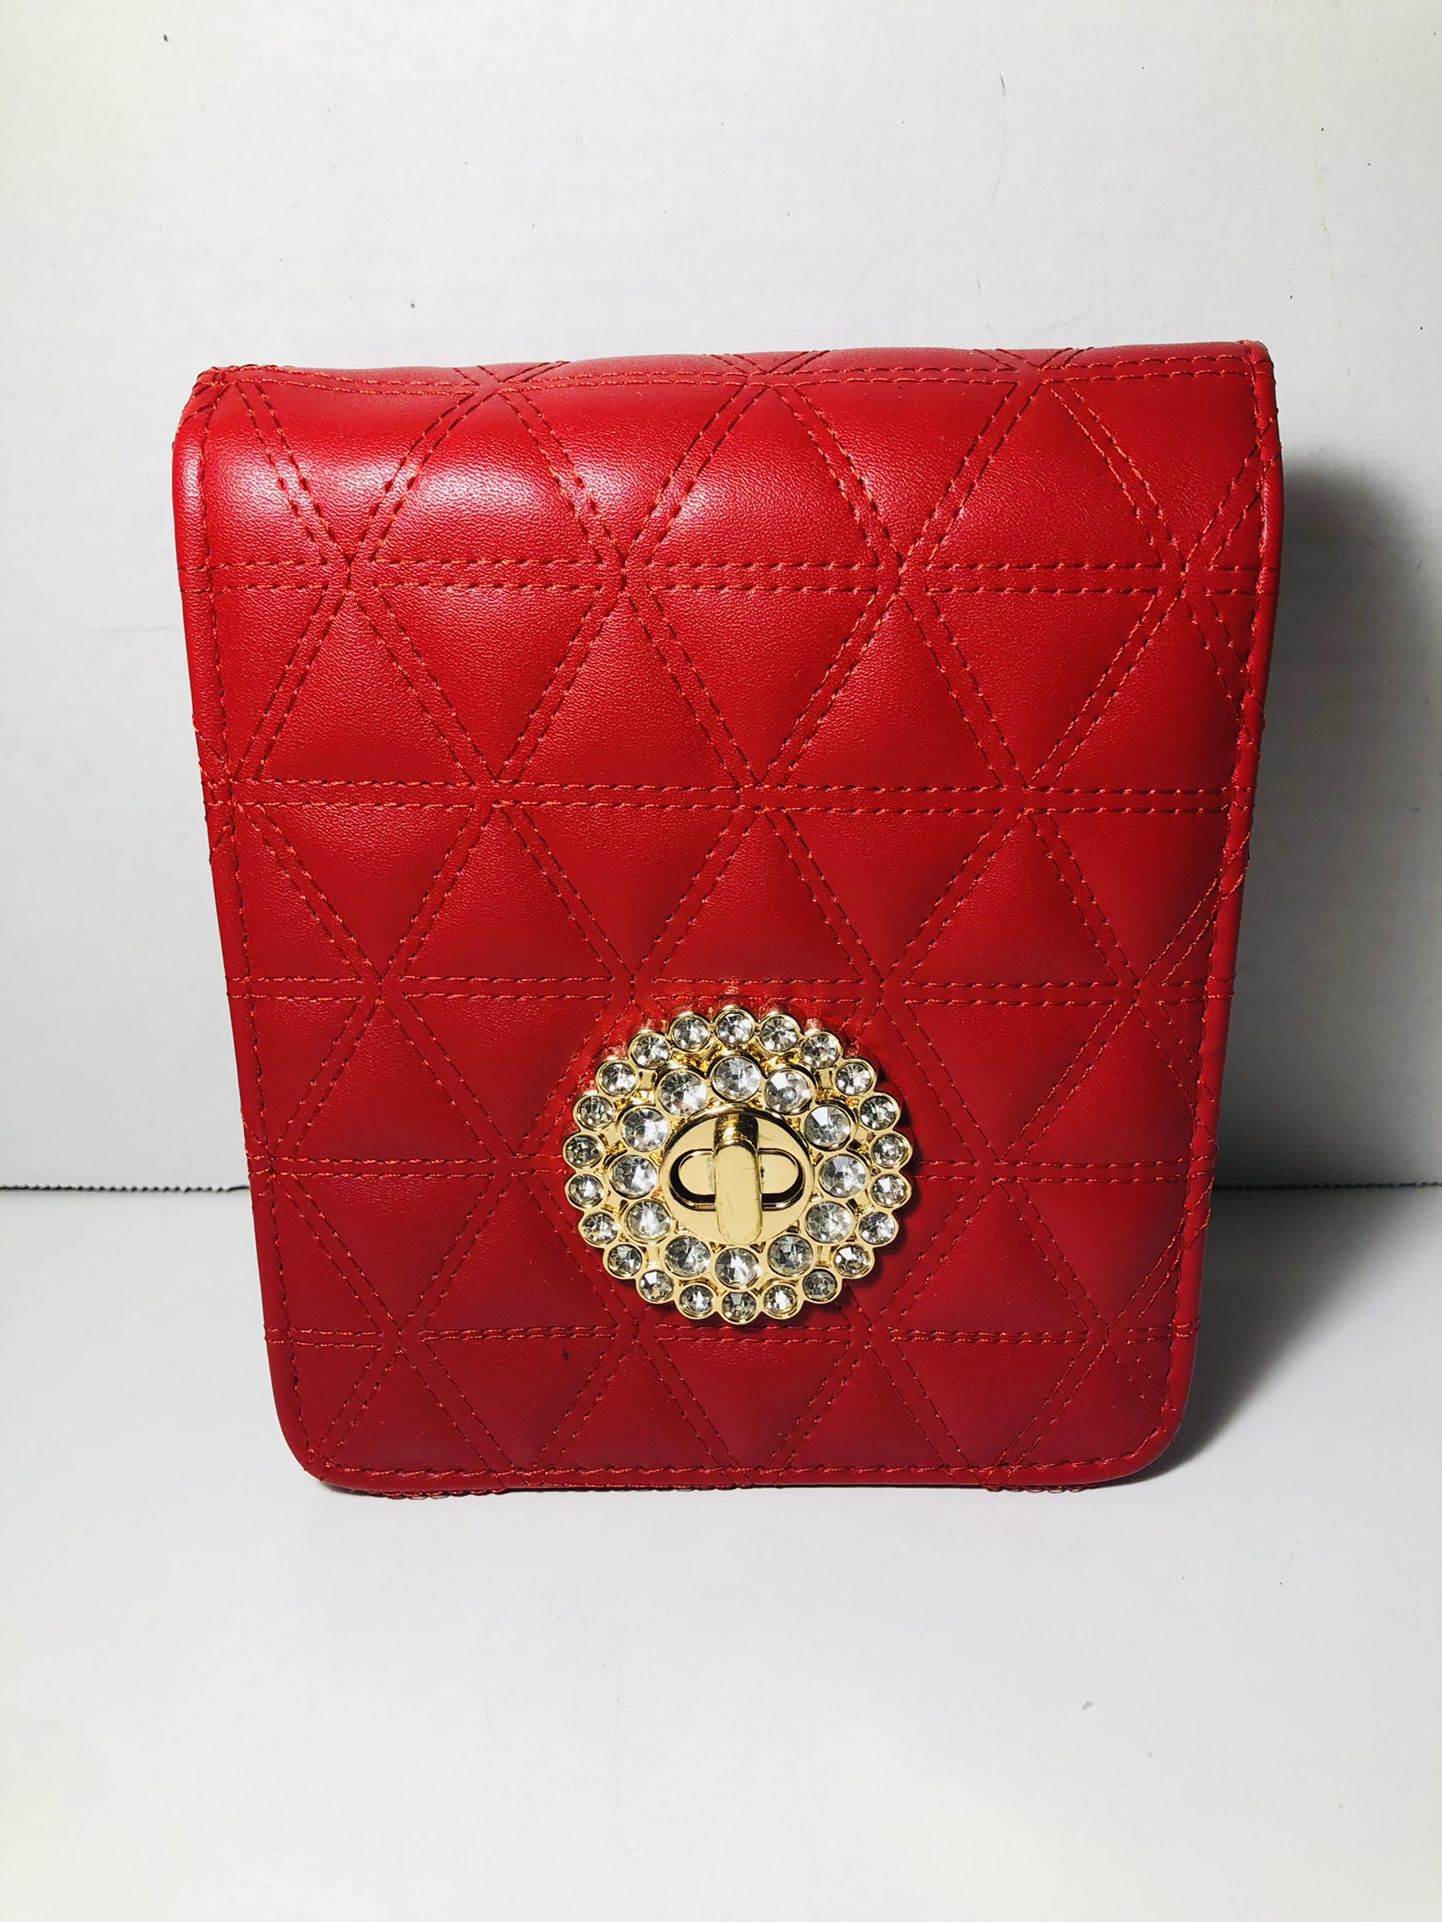 Red Evening Bag, Long Gold Chain Strap NWOT